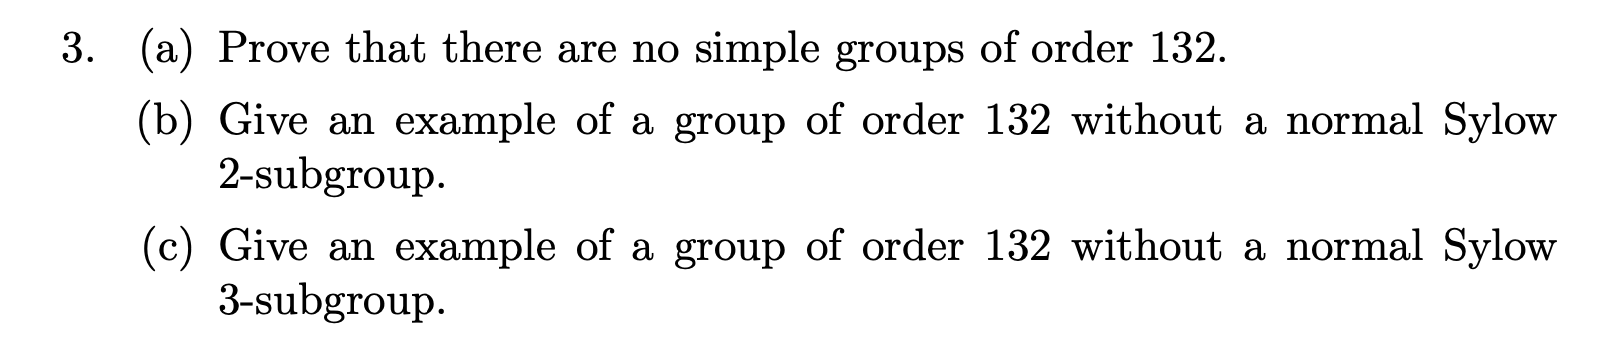 3. (a) Prove that there are no simple groups of order 132.
(b) Give an example of a group of order 132 without a normal Sylow